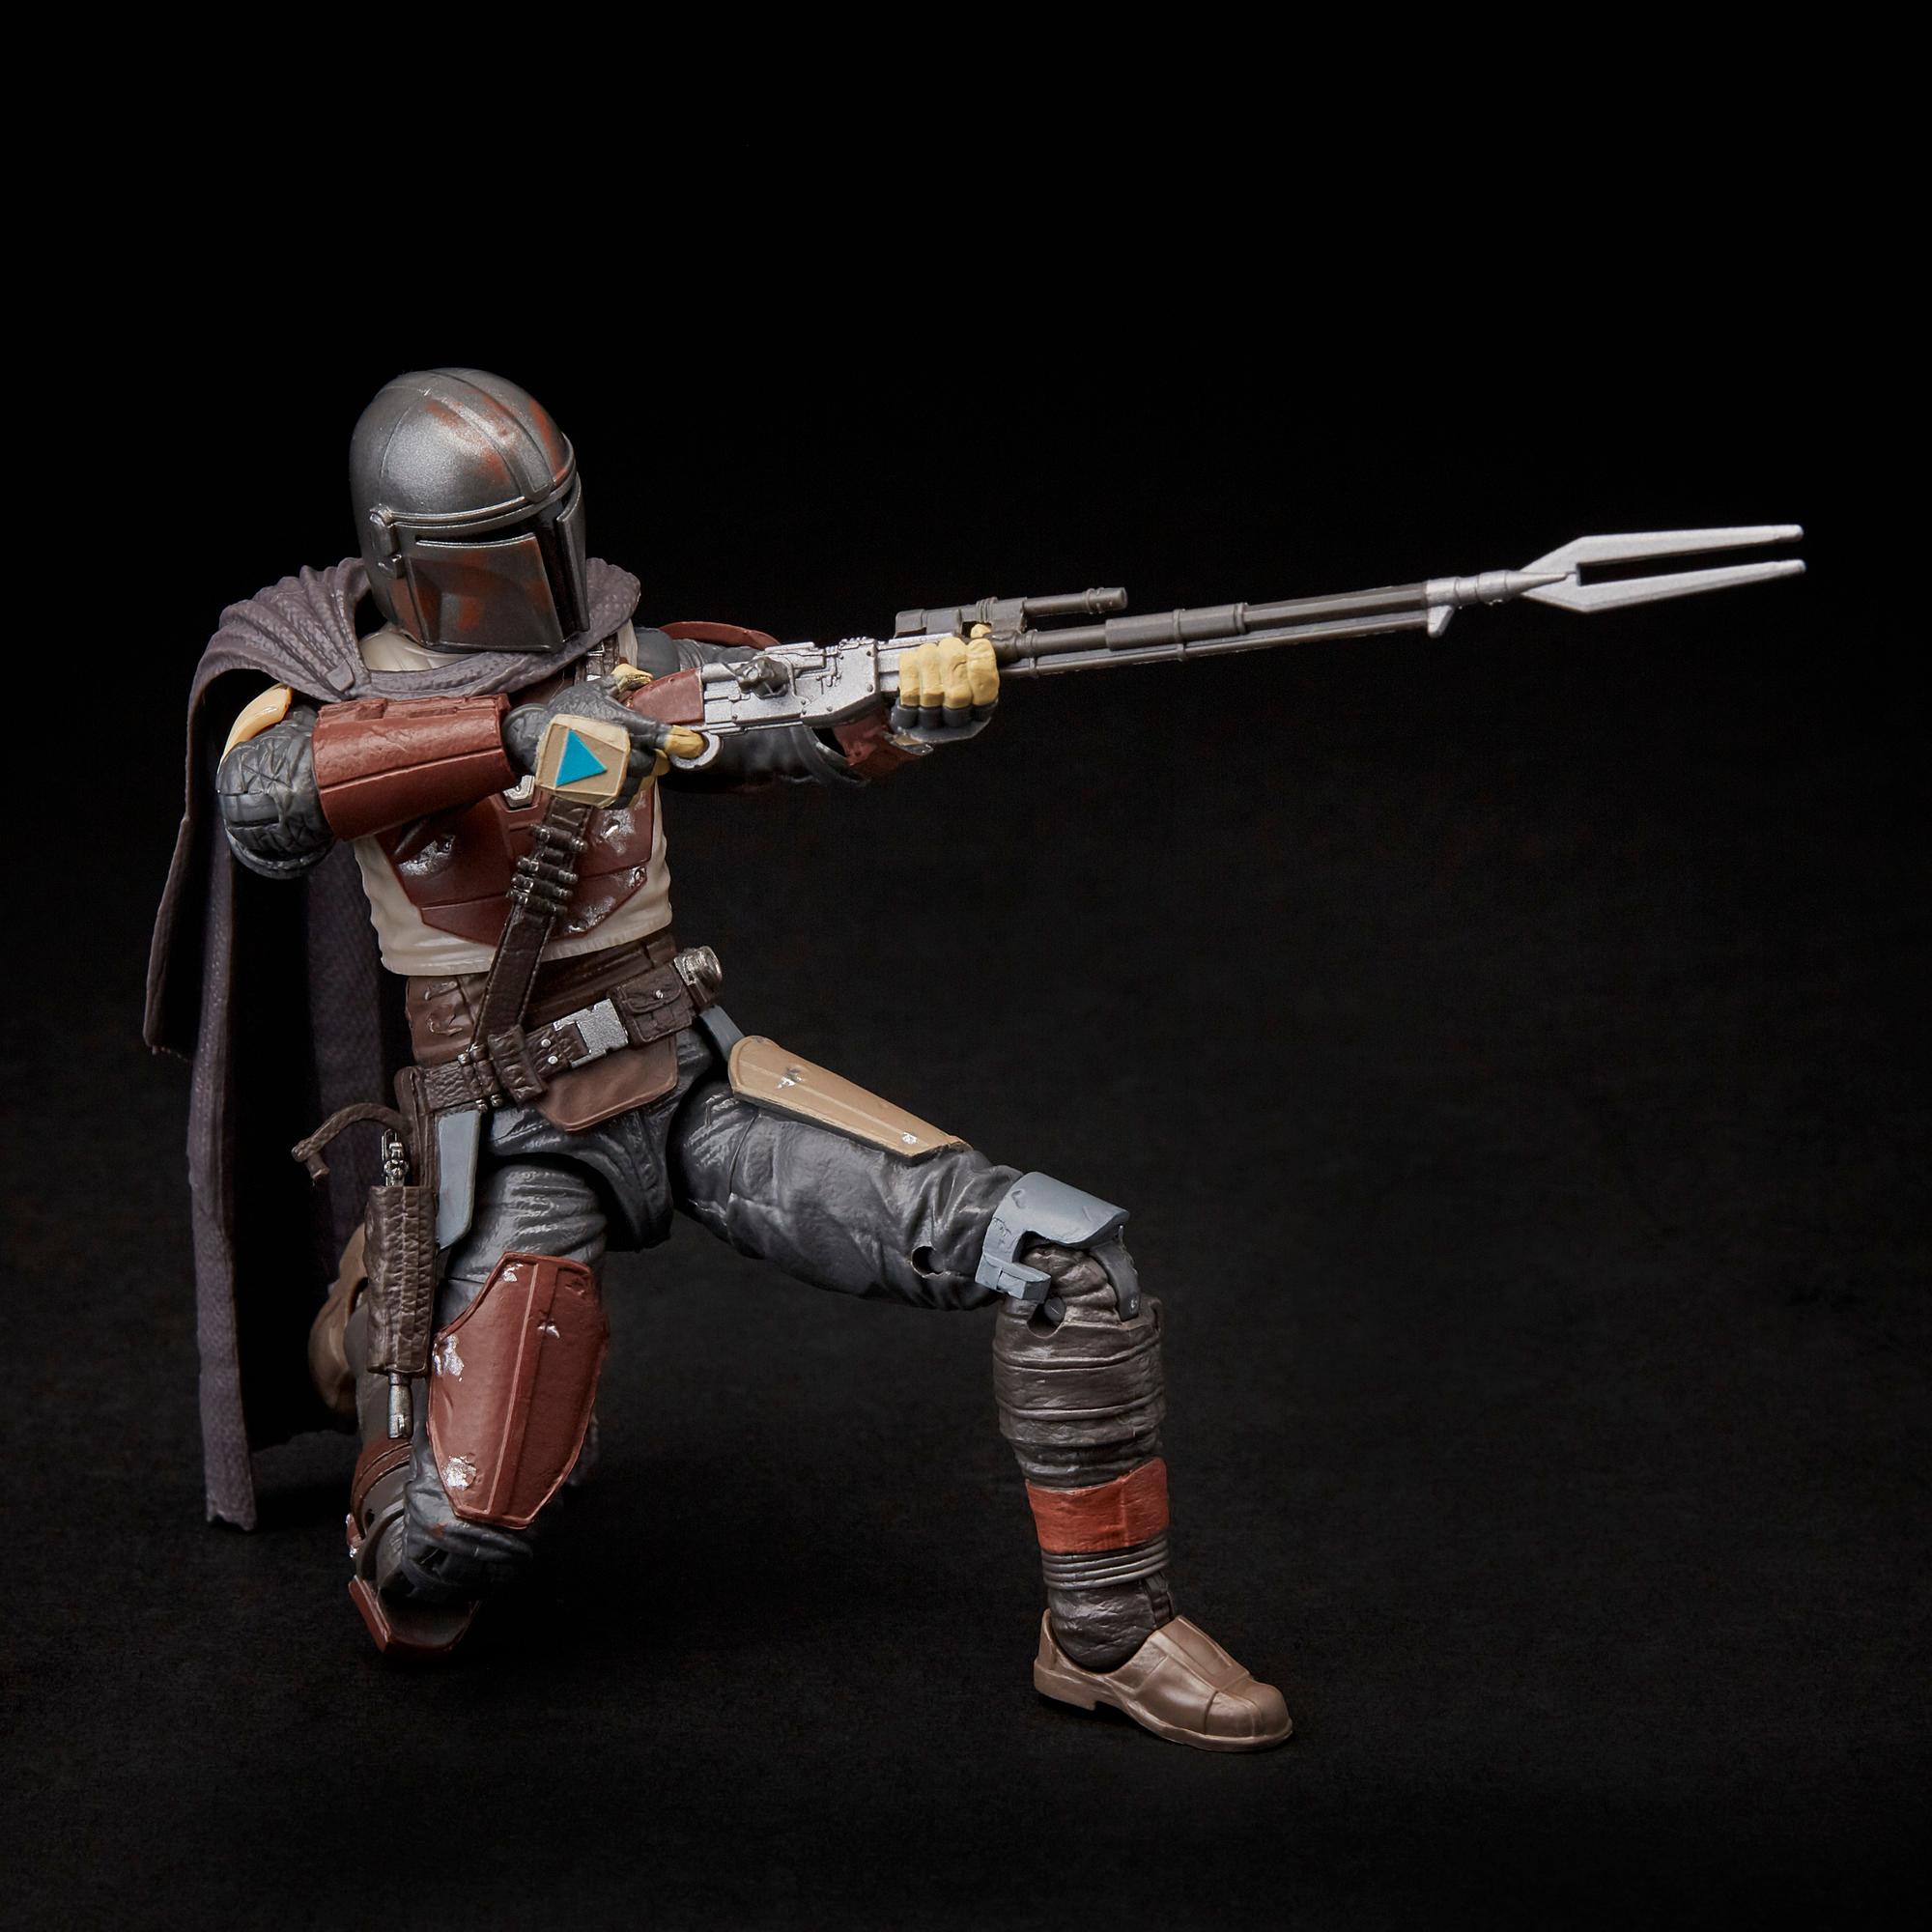 Star Wars The Black Series The Mandalorian Toy 6-inch Scale 